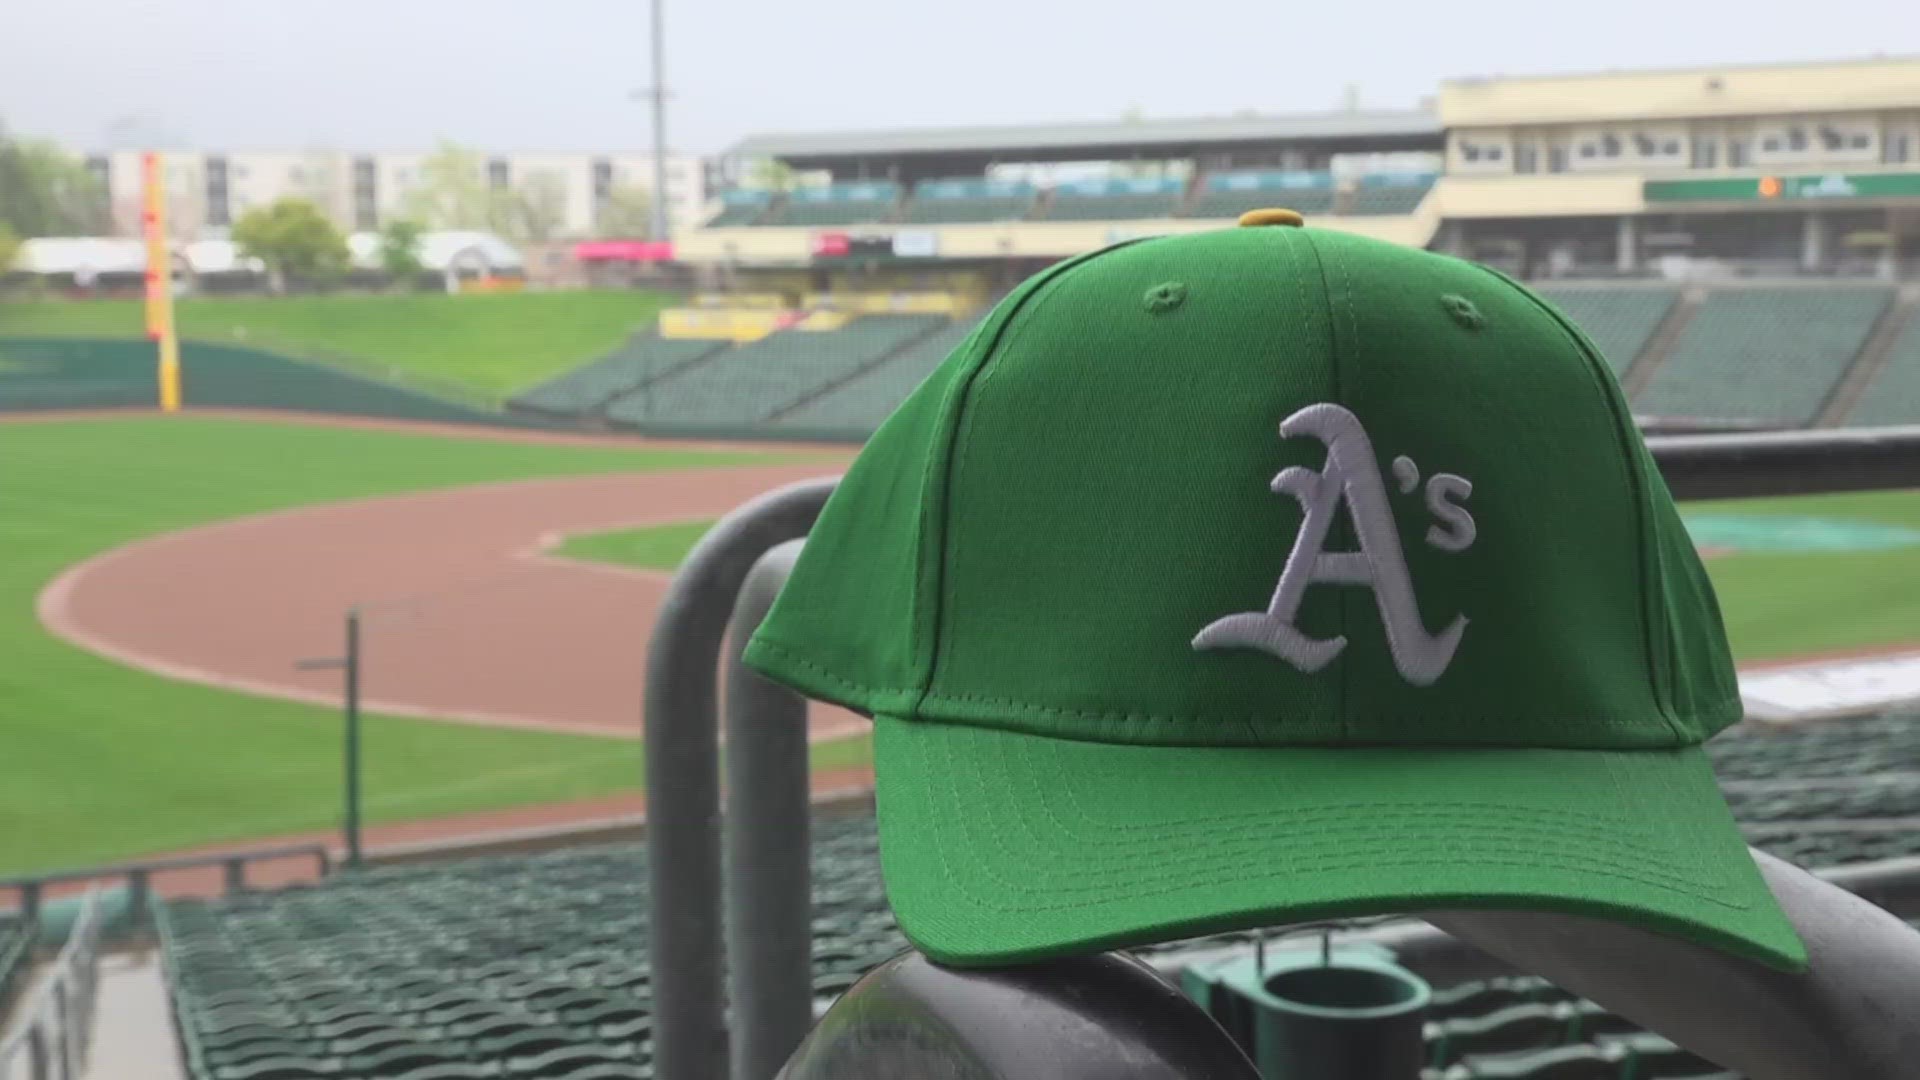 The A's coming to Sacramento is providing a bridge for the A's eventual move to Las Vegas, but it still gives the city a chance to showcase itself.